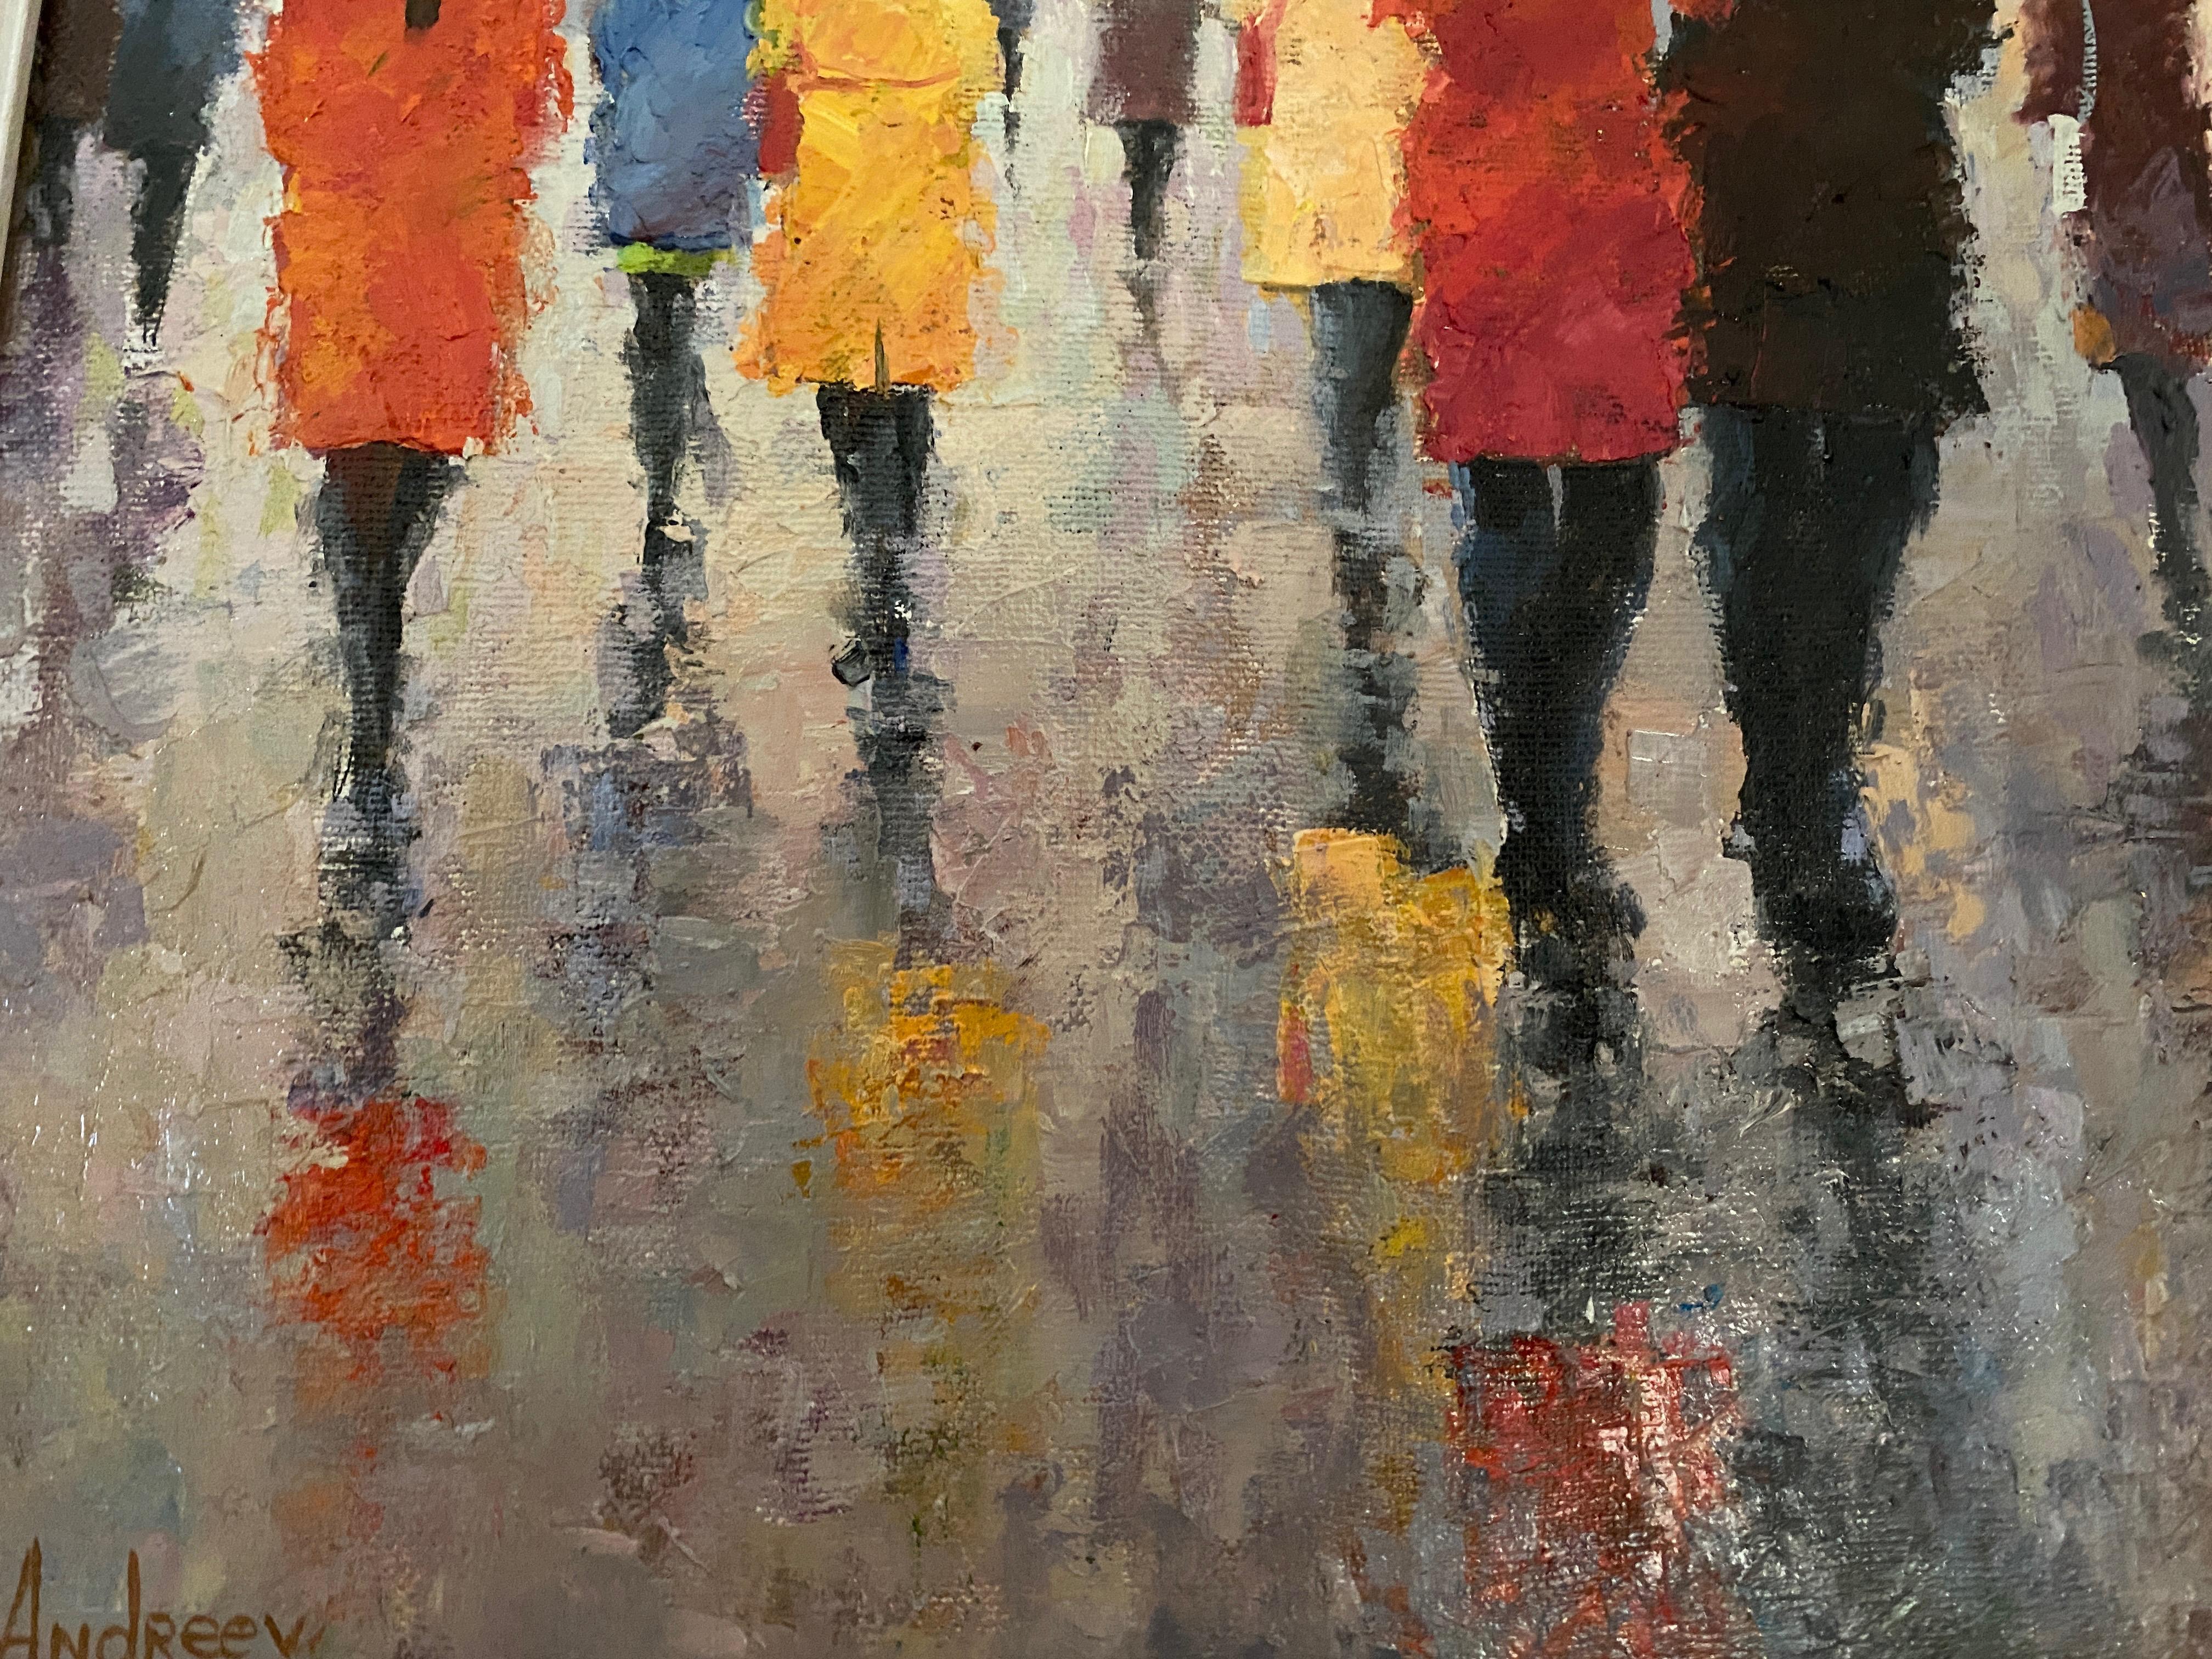 Rainy day. Oil on canvas. Impressionistic colorful street scene. For Sale 1